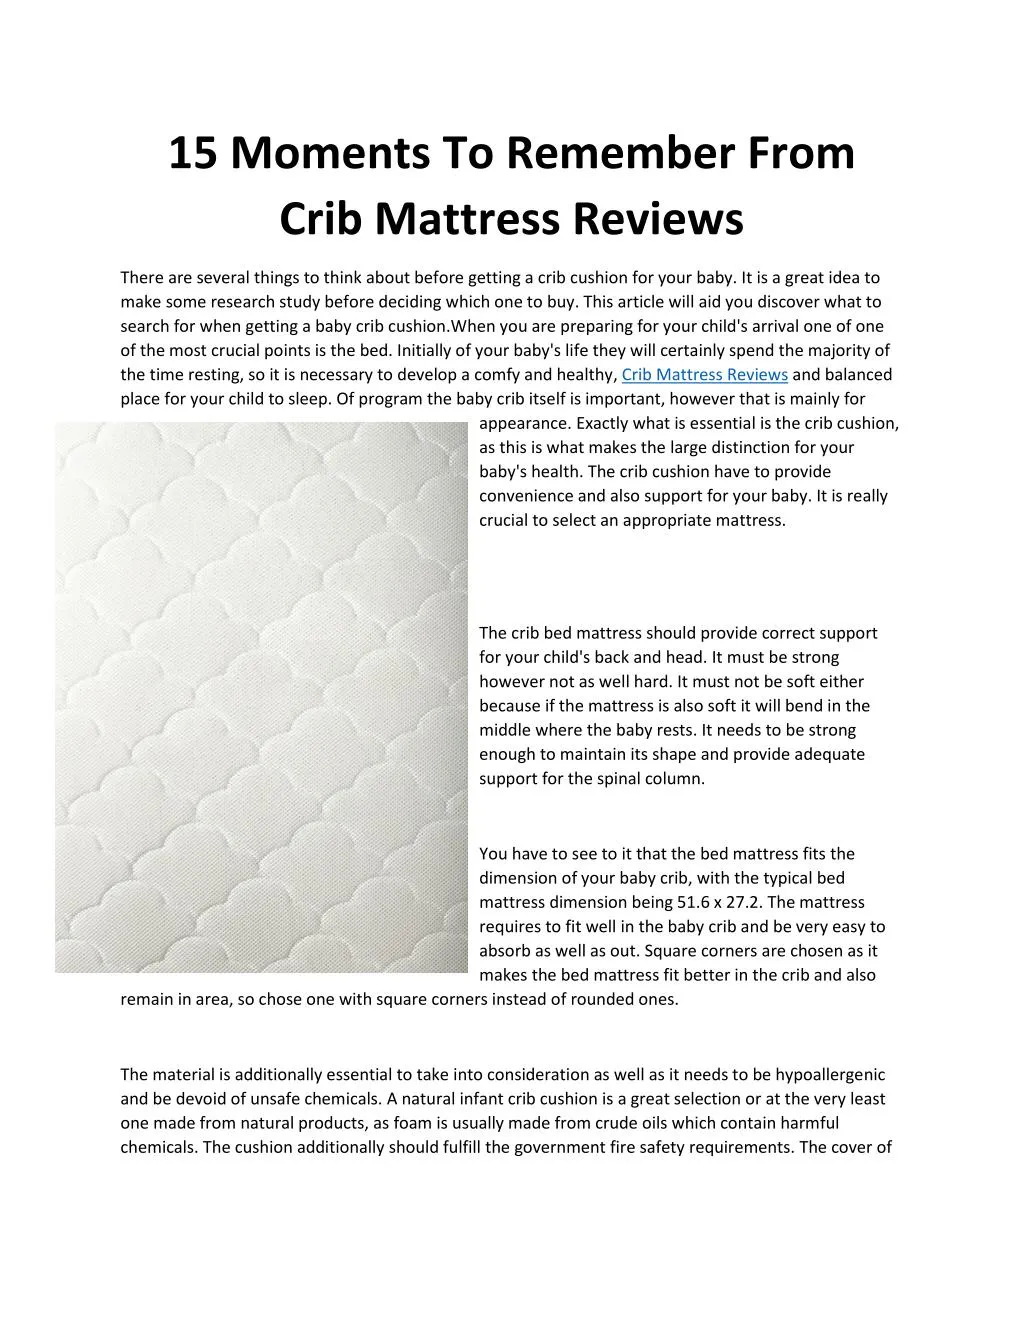 15 moments to remember from crib mattress reviews n.